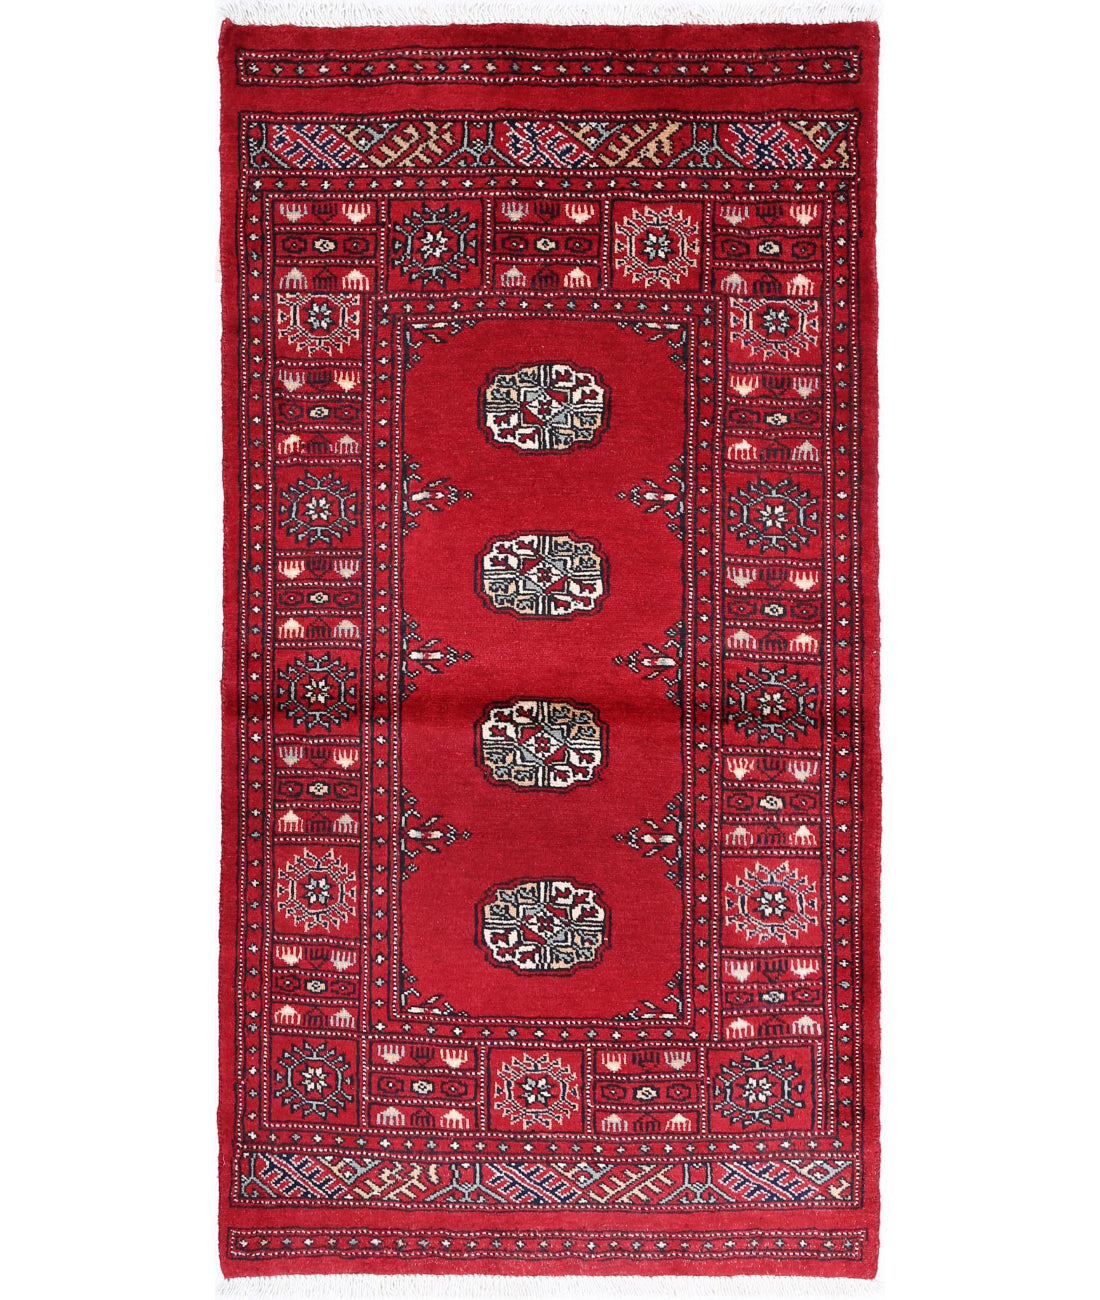 Hand Knotted Tribal Bokhara Wool Rug - 2'6'' x 4'10'' 2'6'' x 4'10'' (75 X 145) / Red / Red